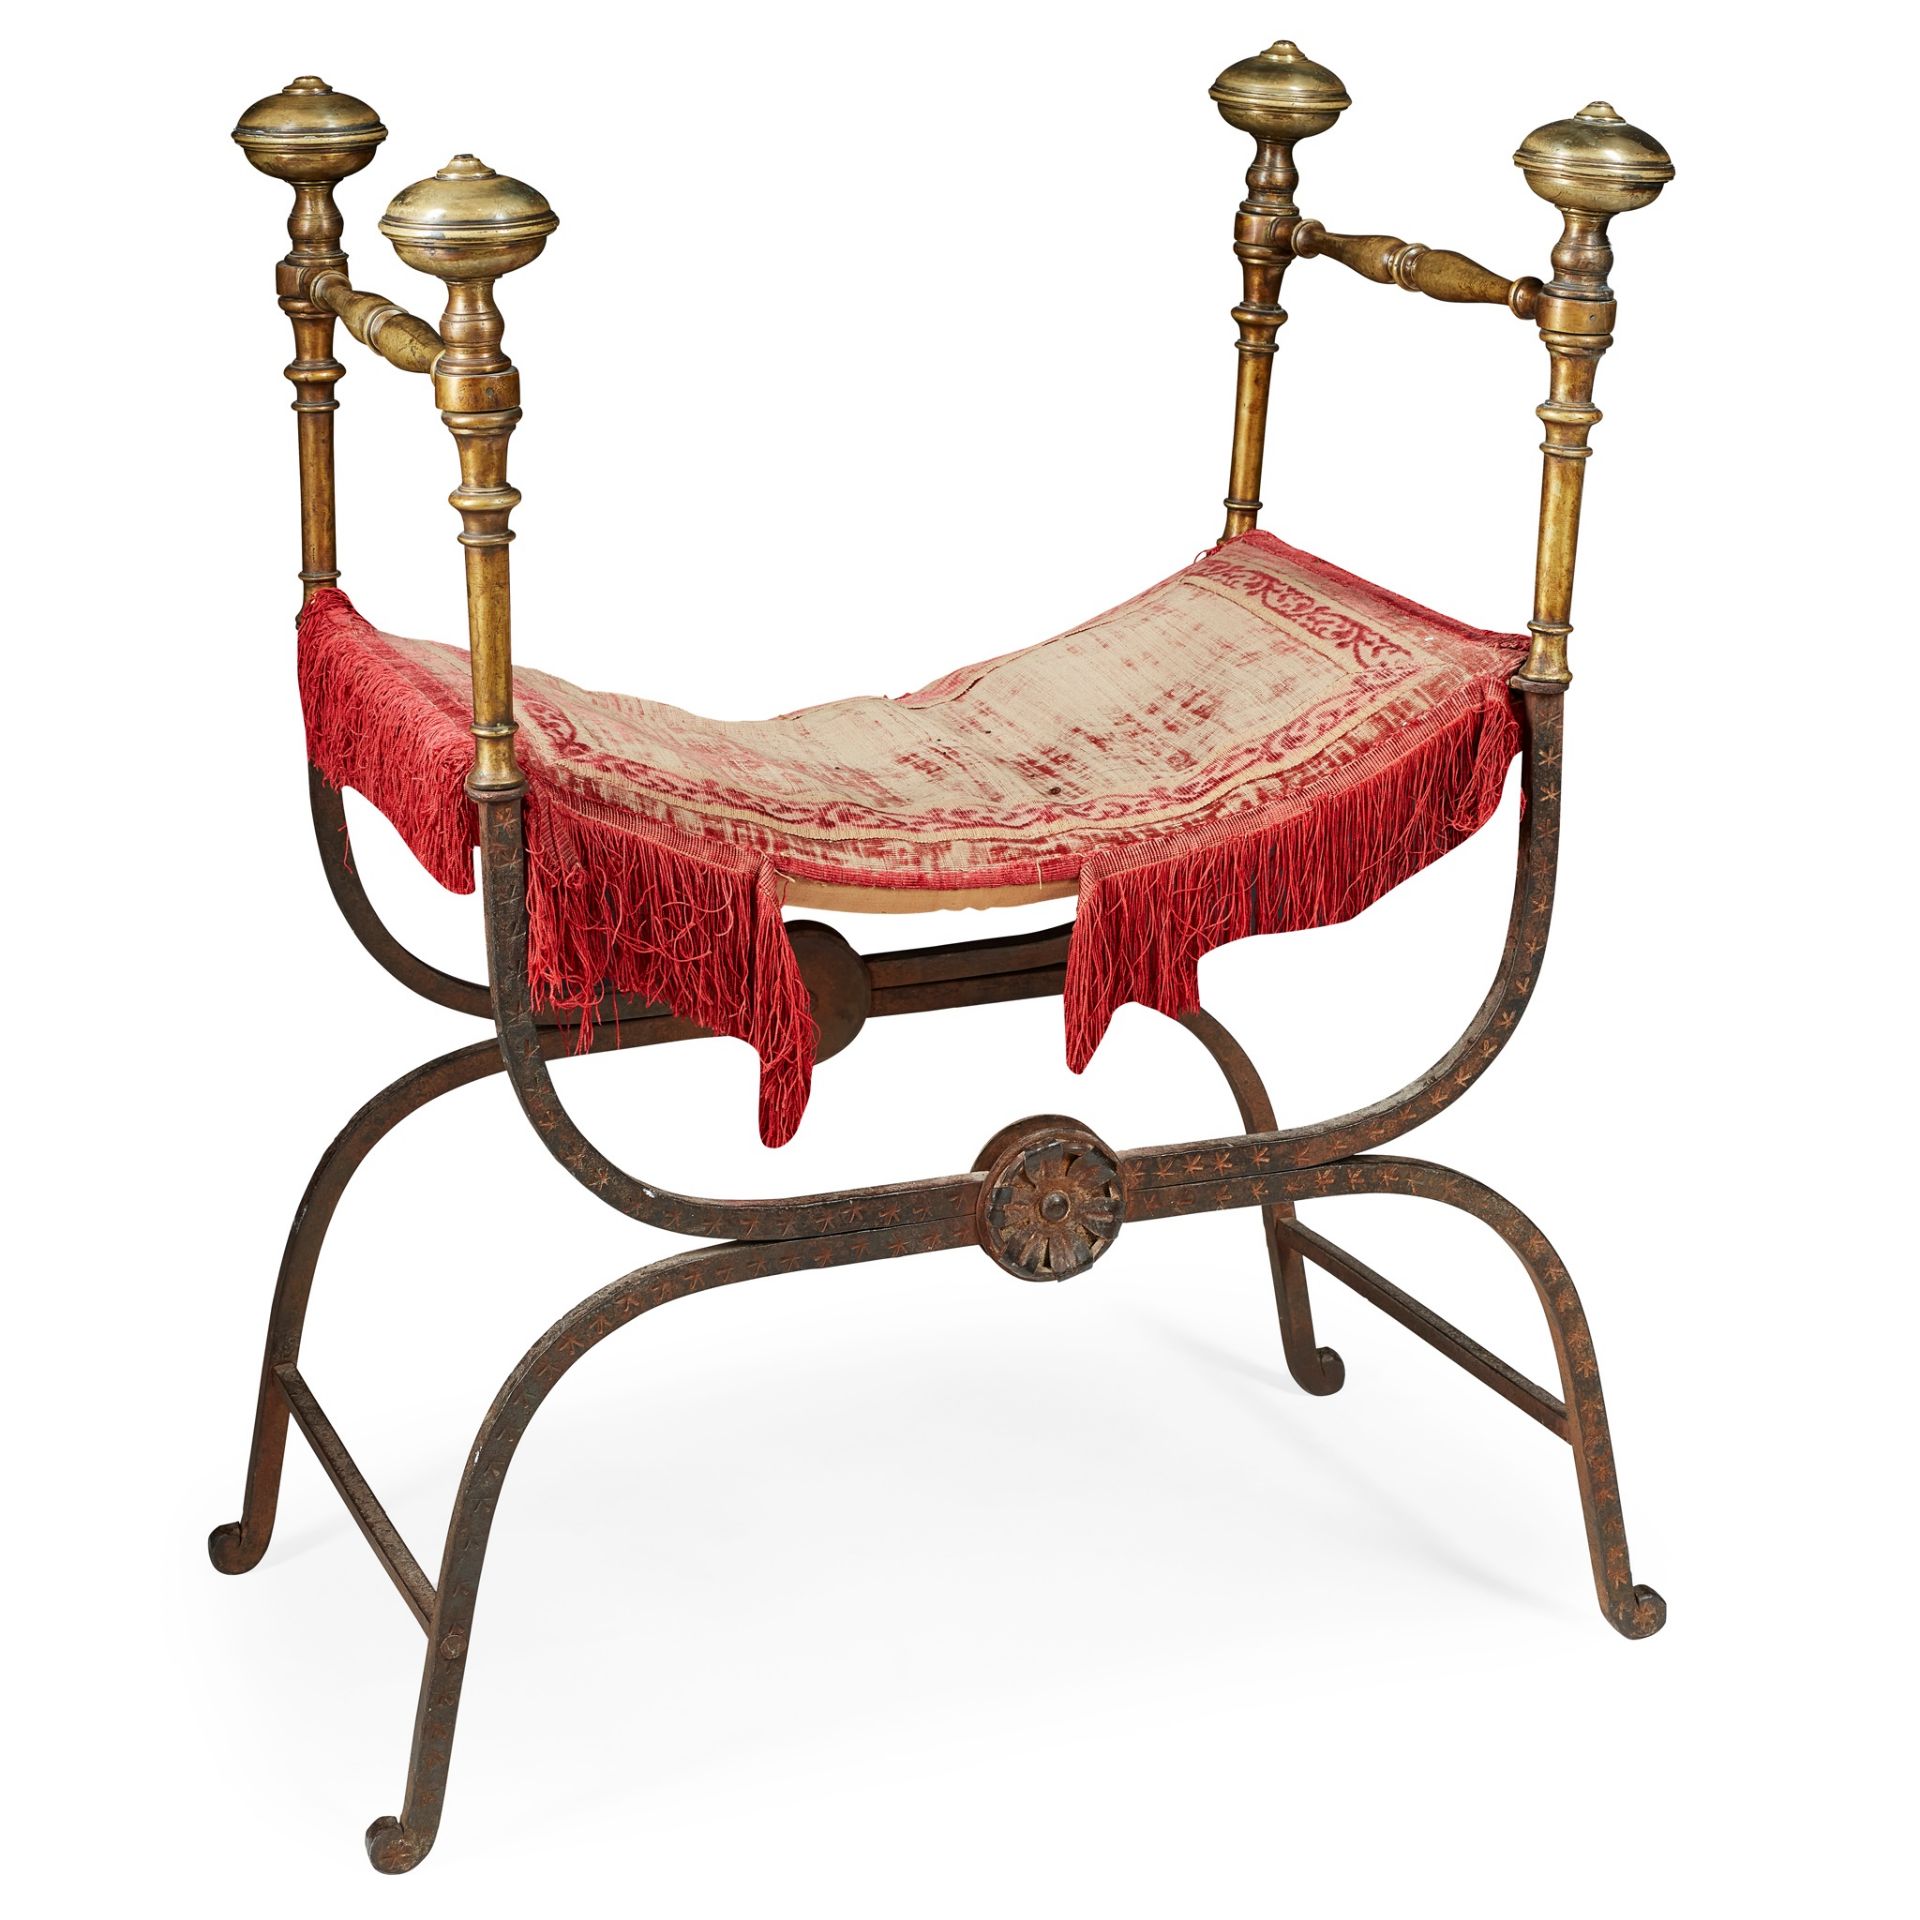 CONTINENTAL IRON AND BRASS CURULE CHAIR 19TH CENTURY